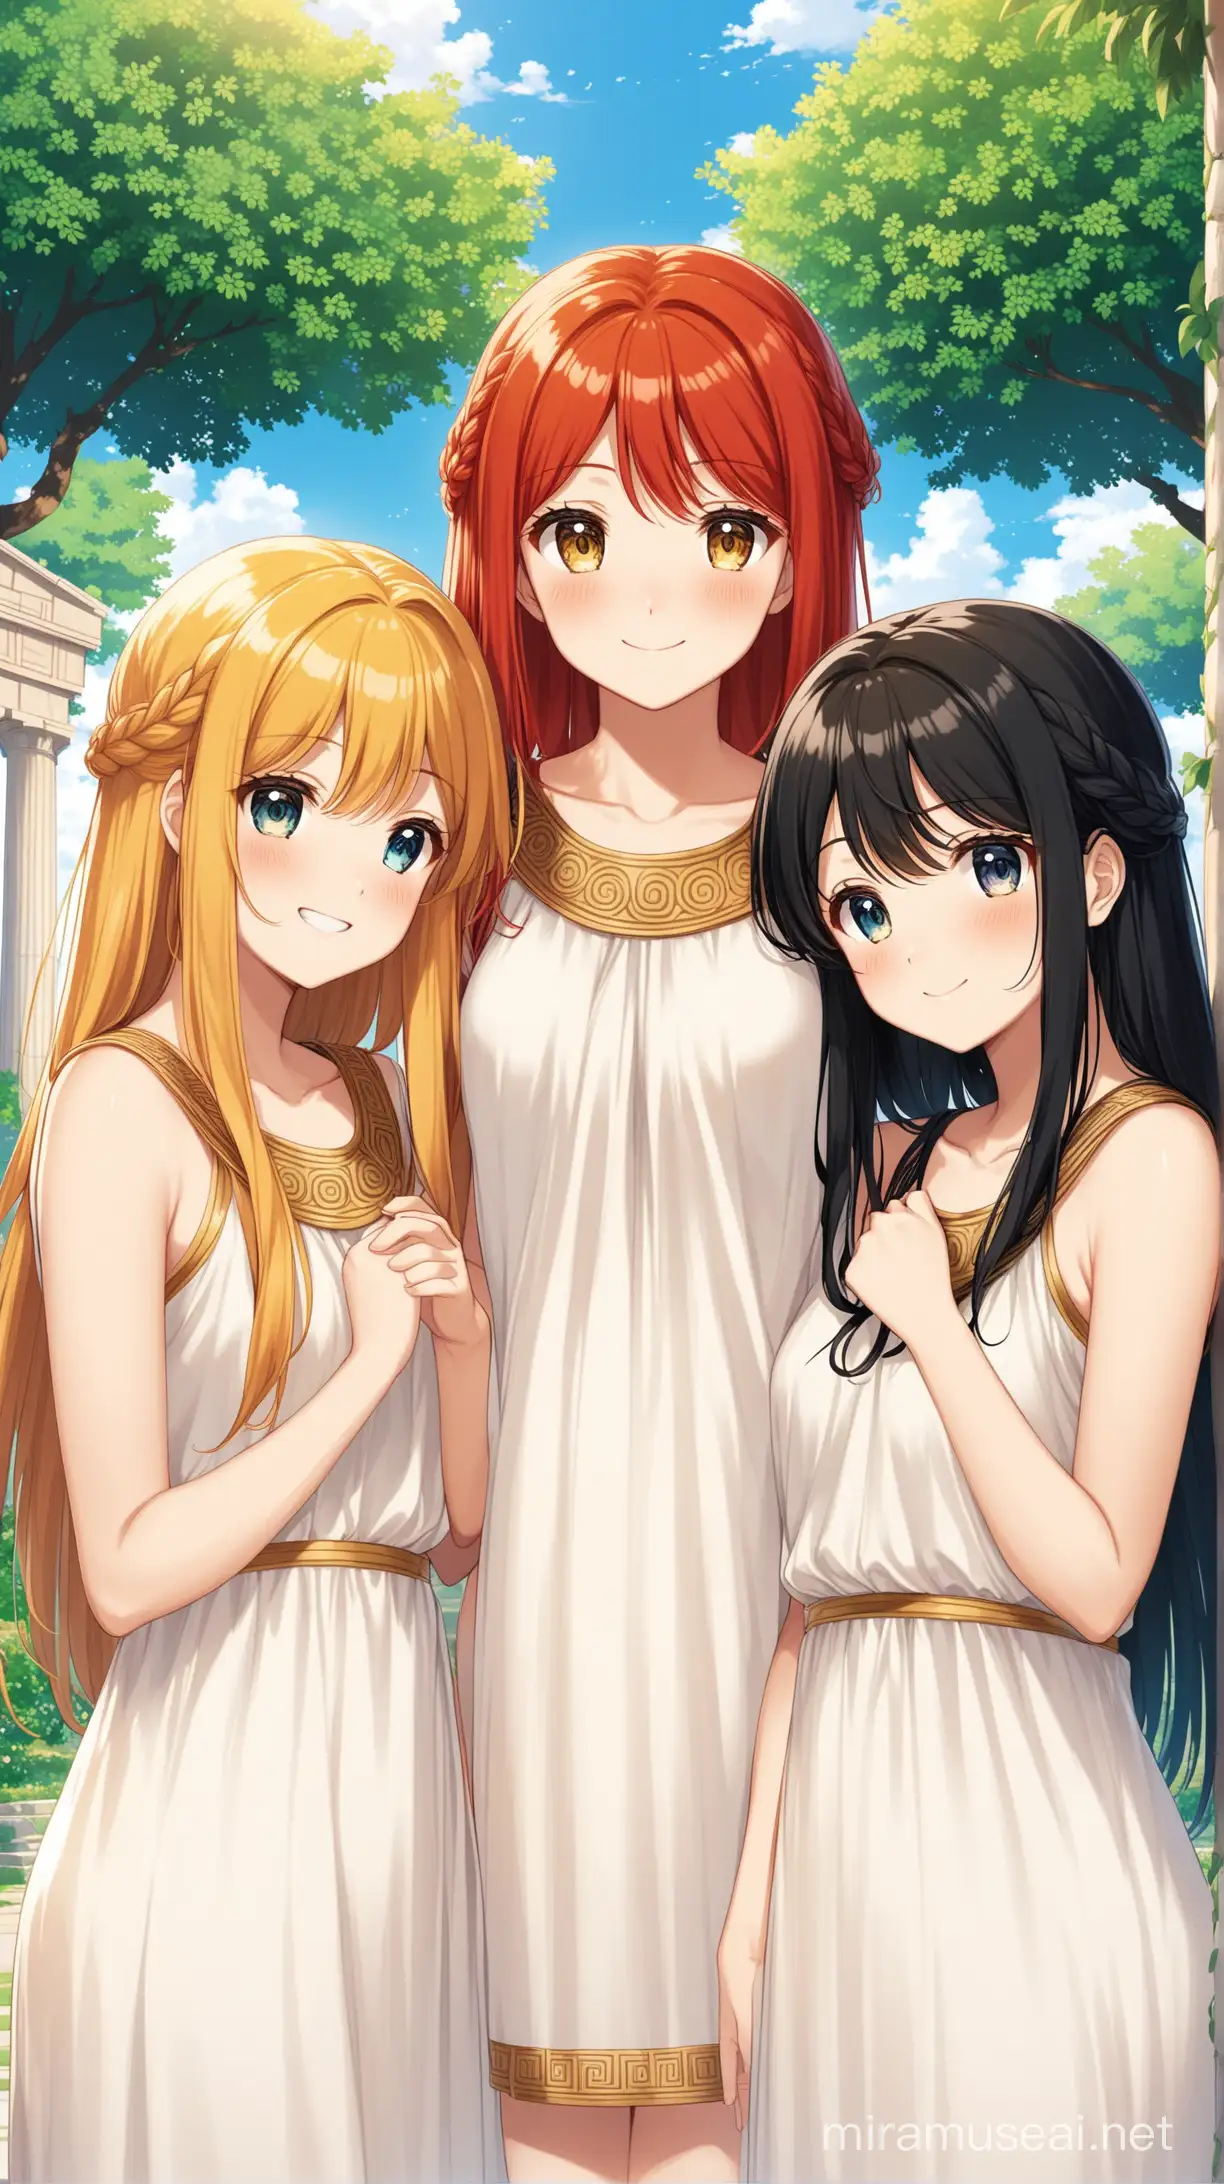 Three anime girls in greek chitons: first with blonde hair and happy, second with redhead hair and neutral, third with black hair and sad, ancient greek, garden on background